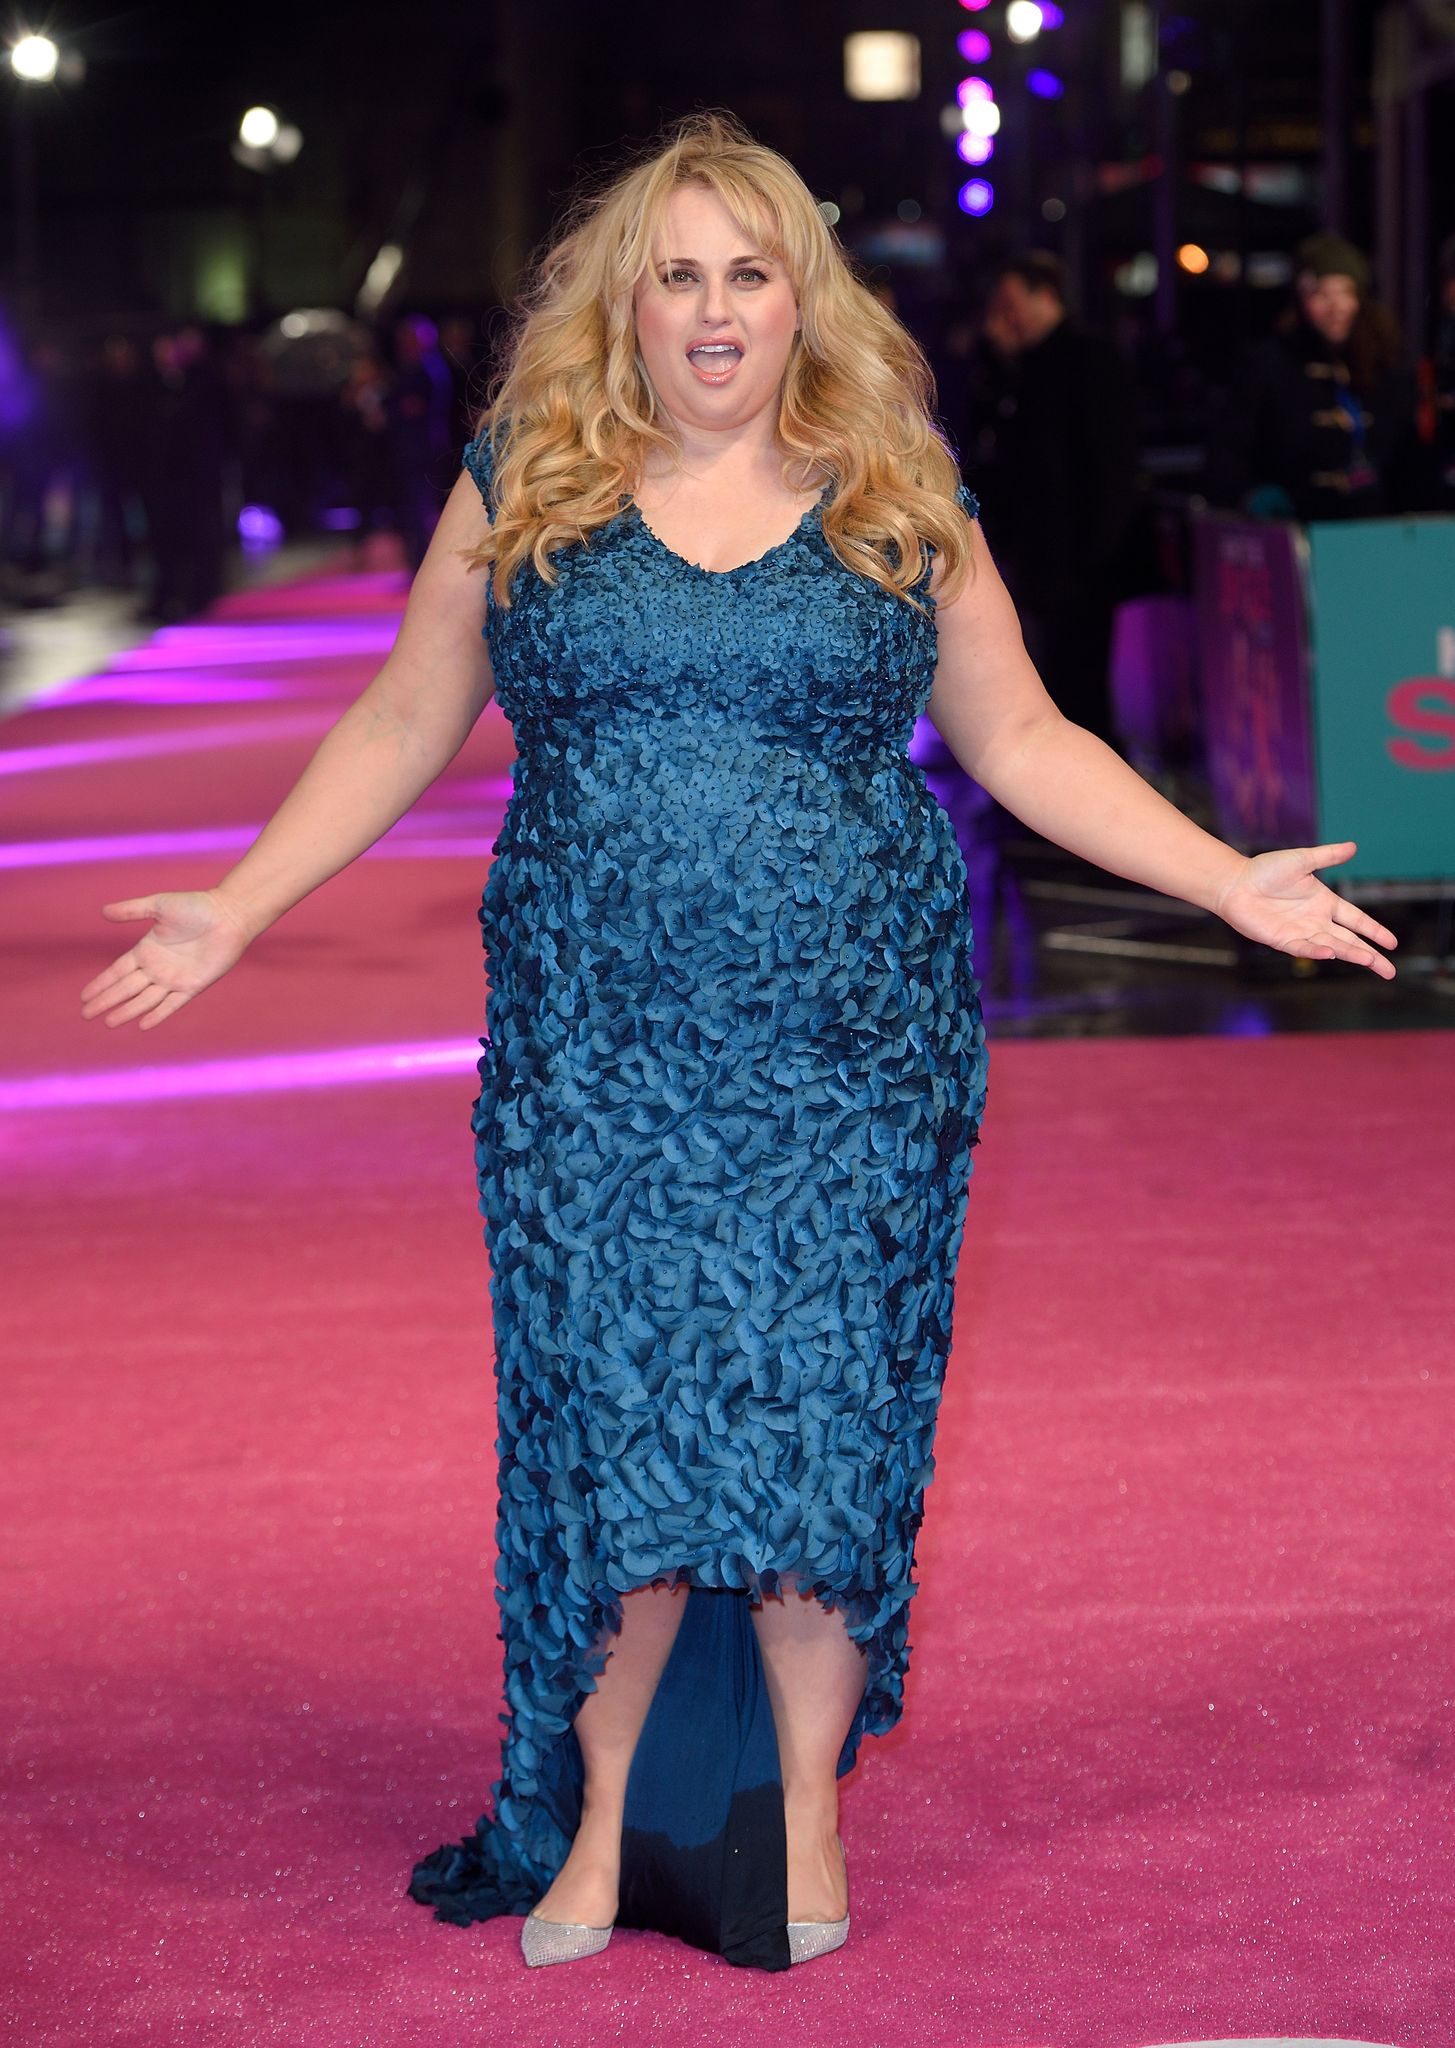 Rebel Wilson during the European Premiere of 'How To Be Single' at the Vue West End on February 9, 2016 in London, United Kingdom. | Source: Getty Images